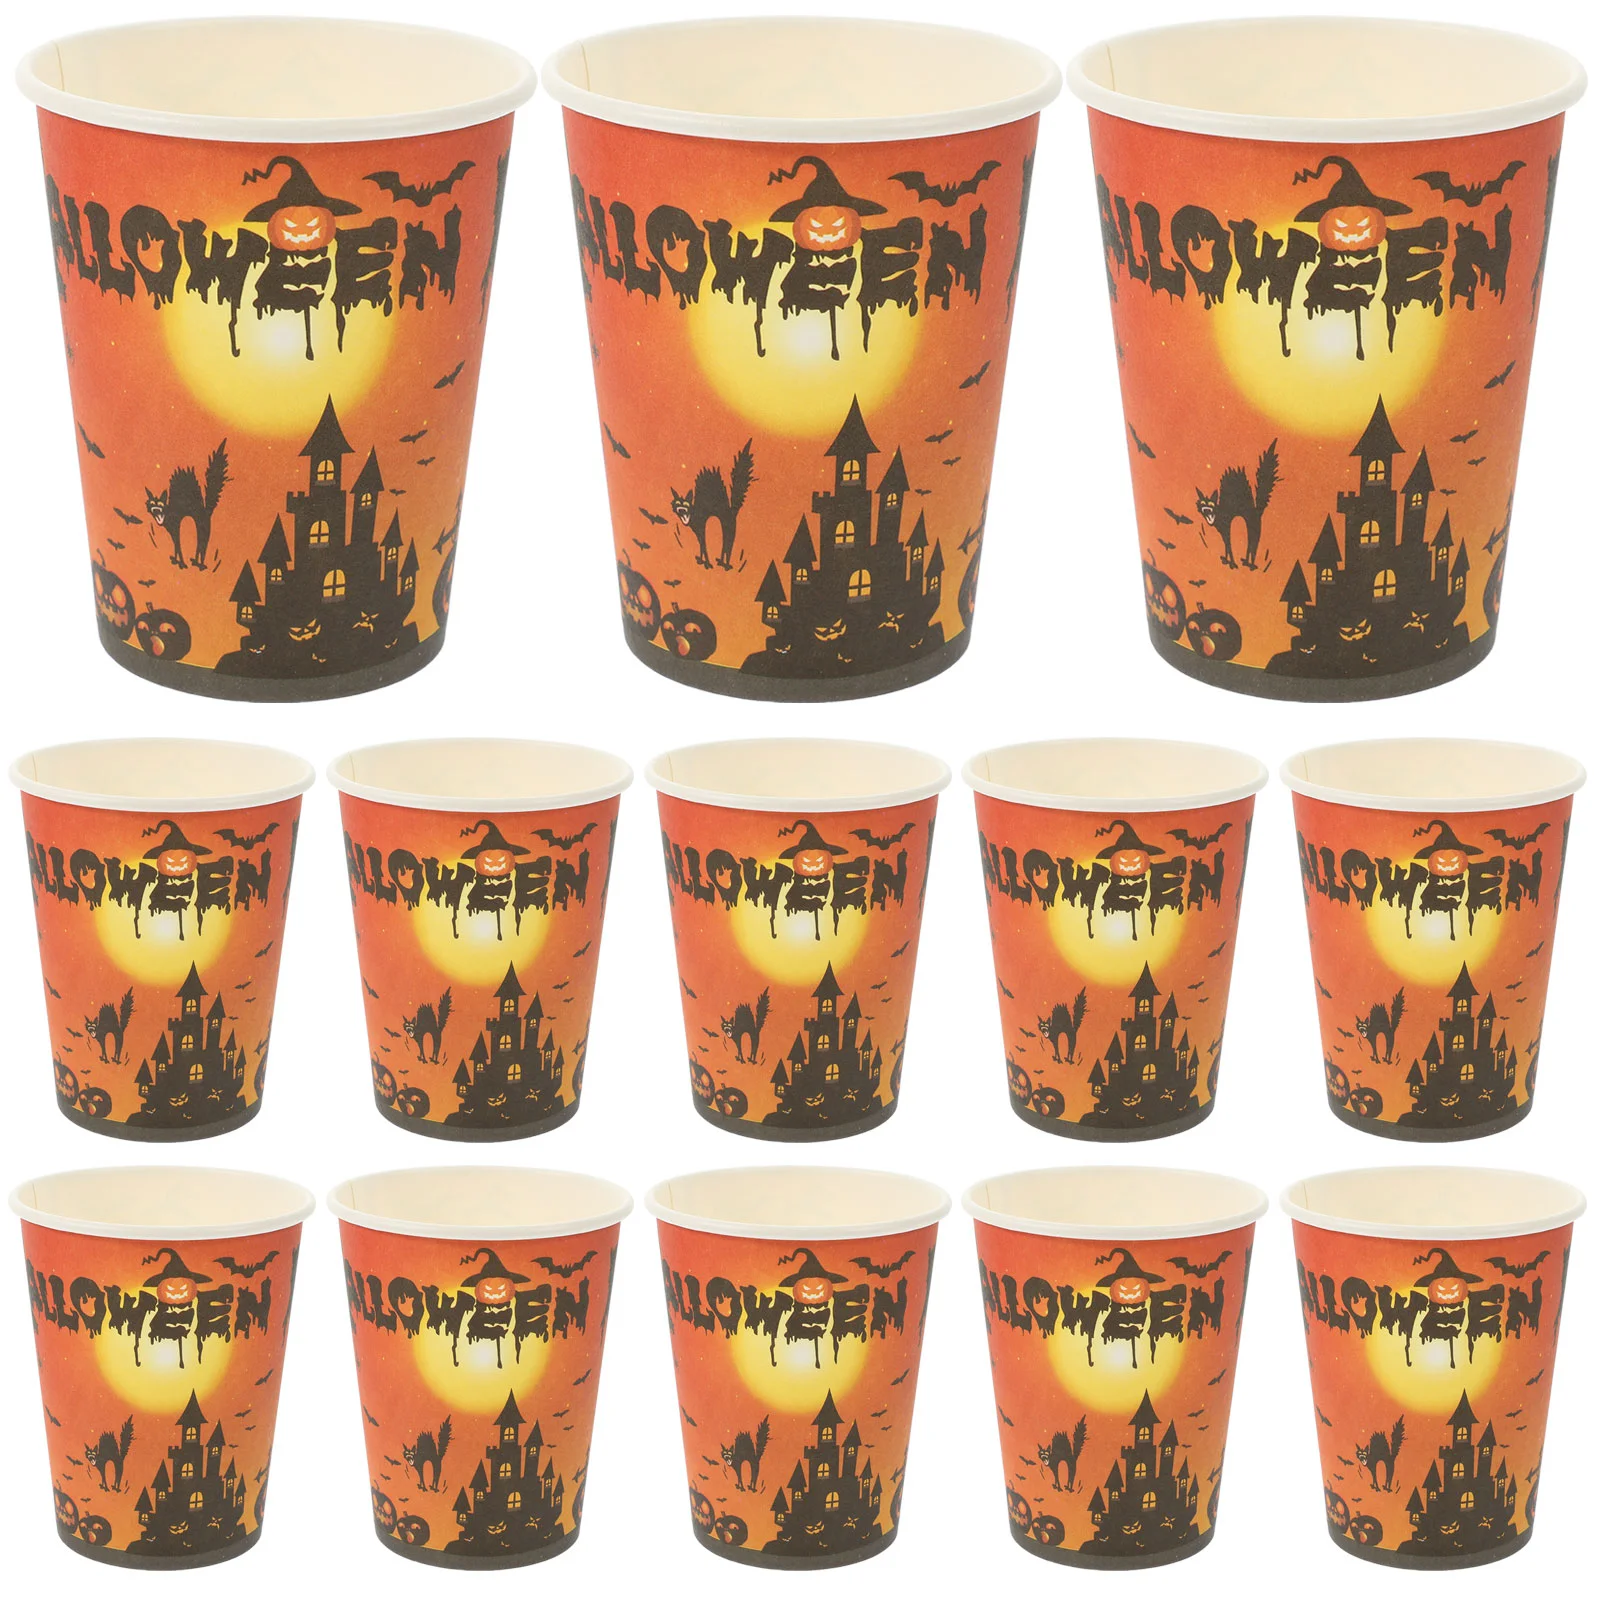 

24 Pcs Disposable Party Dinnerware Cup Serving Utensils Tissue Halloween Paper Cups Accessories Tableware Kit Camping Mugs